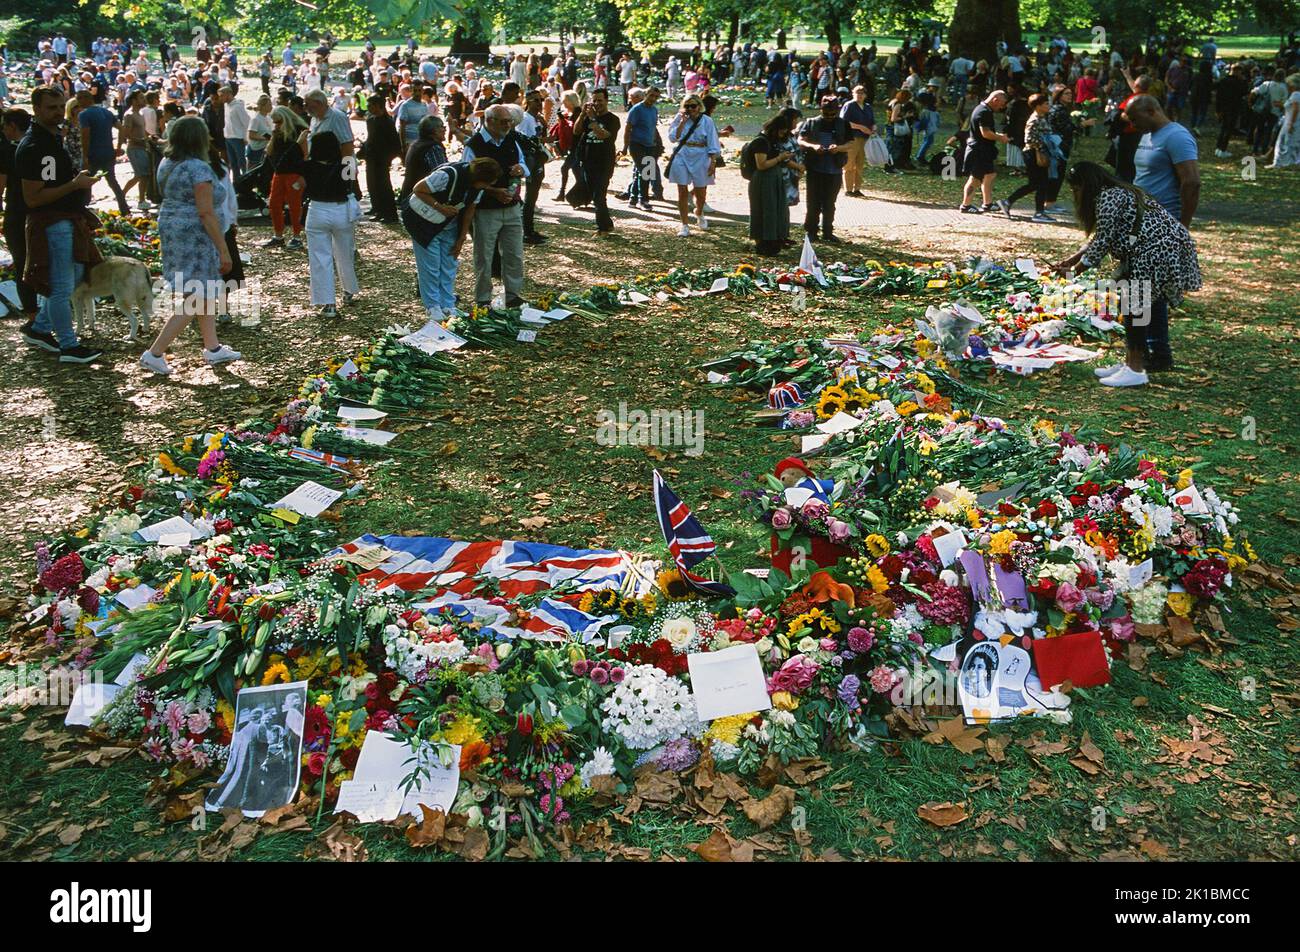 Crowds and floral tributes to Queen Elizabeth II in Green Park, London UK, on the 12th September 2022 Stock Photo